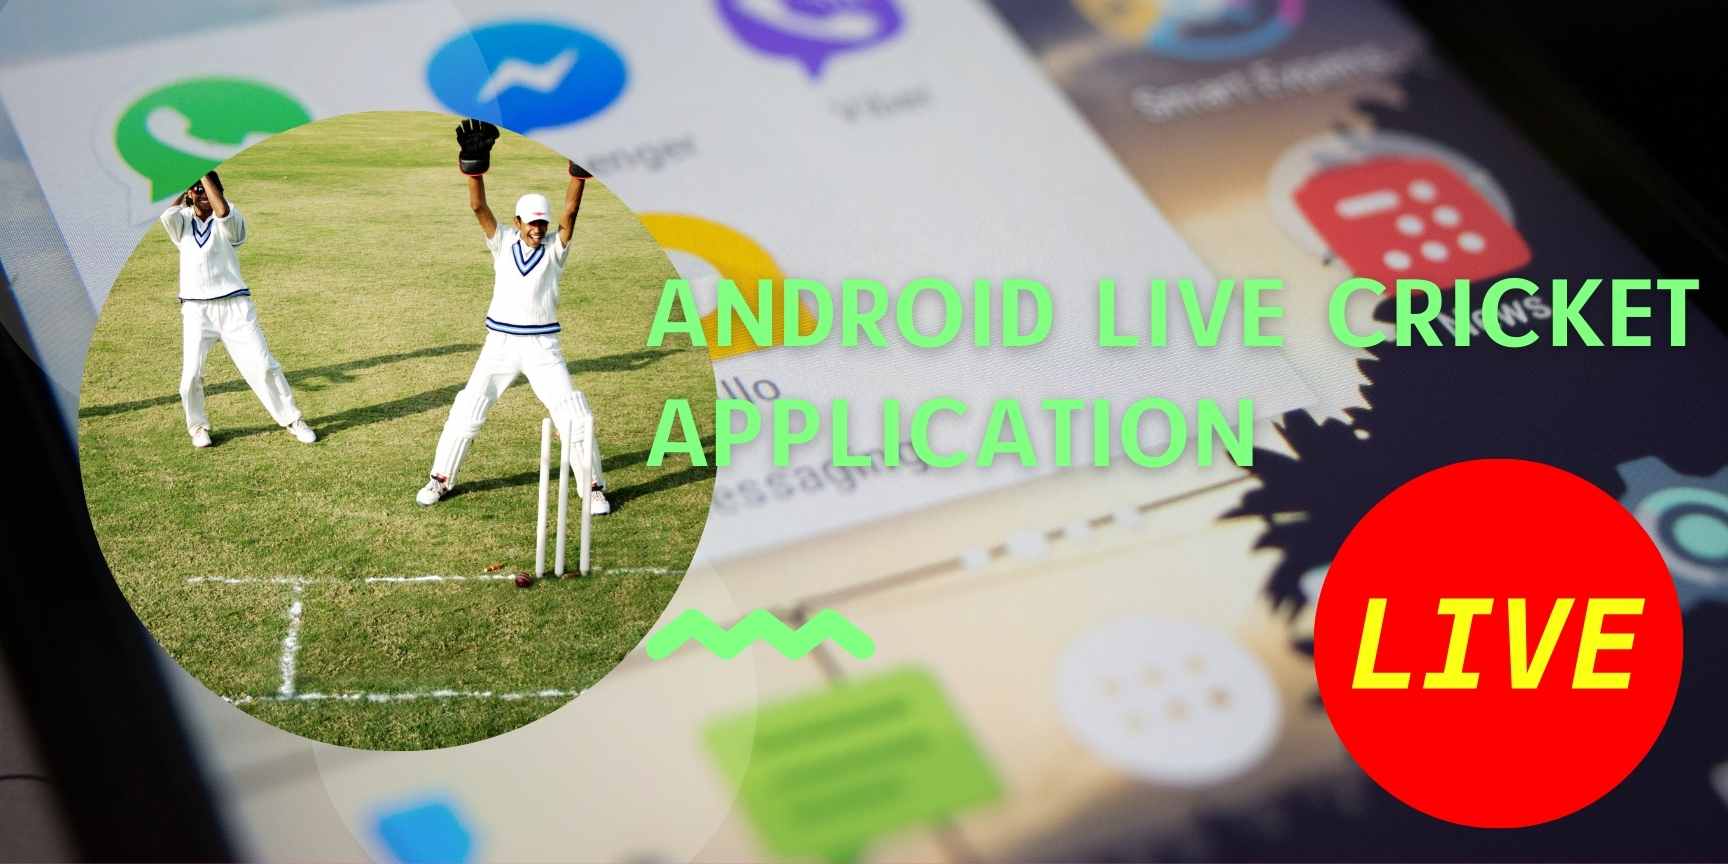 Android live cricket applications